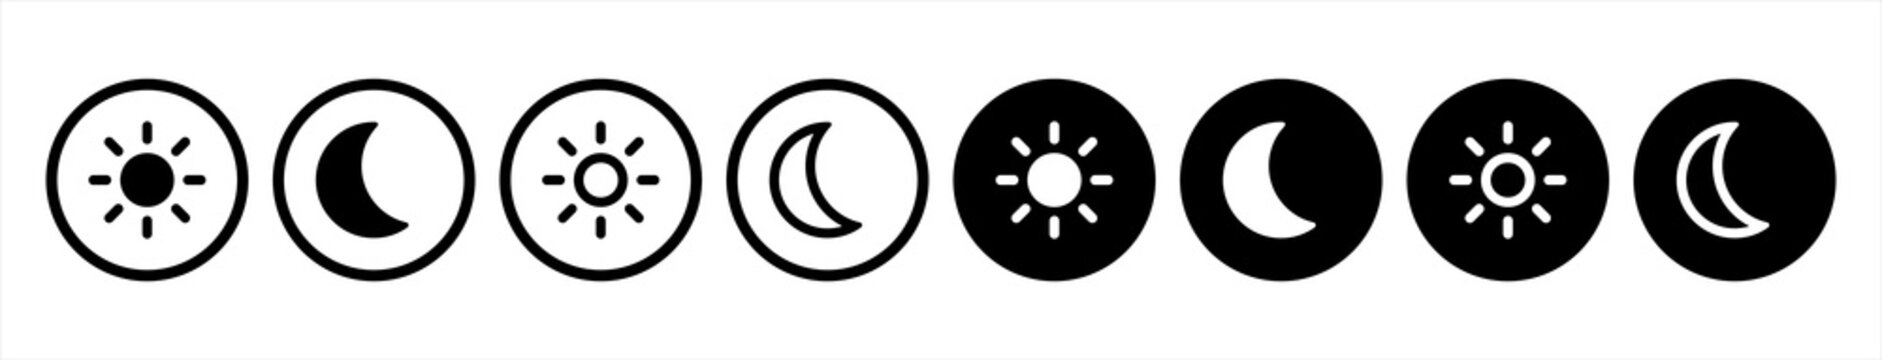 Day and night, dark and light modes. Screen modes icons set. Screen brightness and contrast level control icons. Day night switch. Vector Illustration